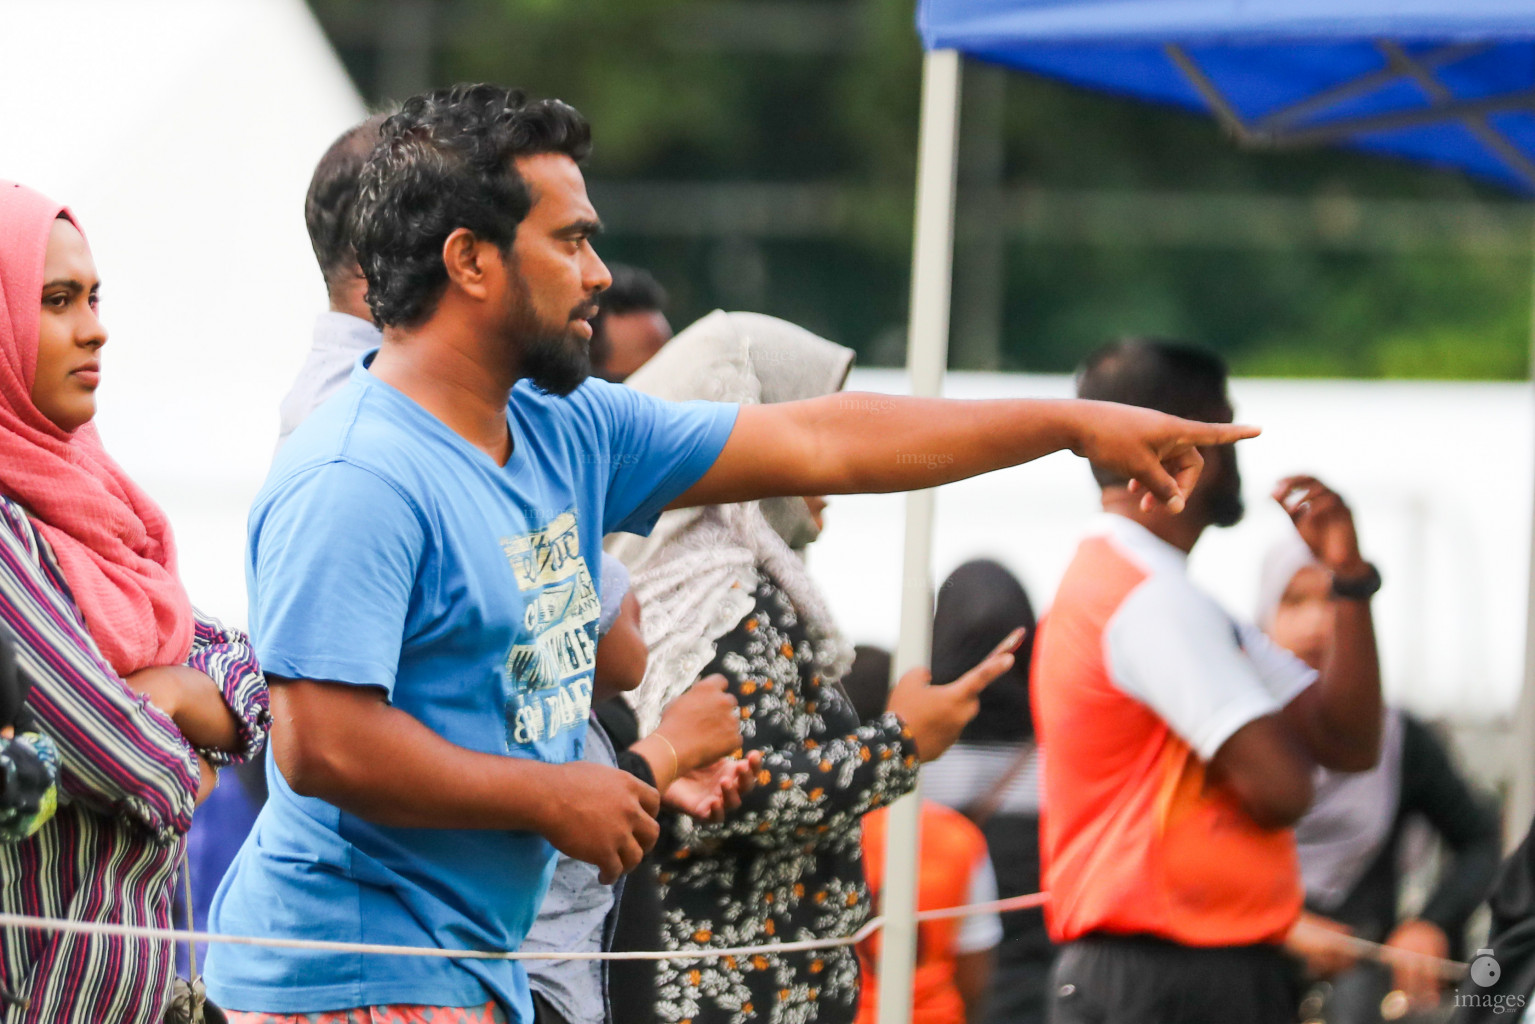 Day 1 of Milo Kids Football Fiesta in Henveiru Grounds in Male', Maldives, Wednesday, Fe20uary 19th 2019 (Images.mv Photo/Suadh Abdul Sattar)